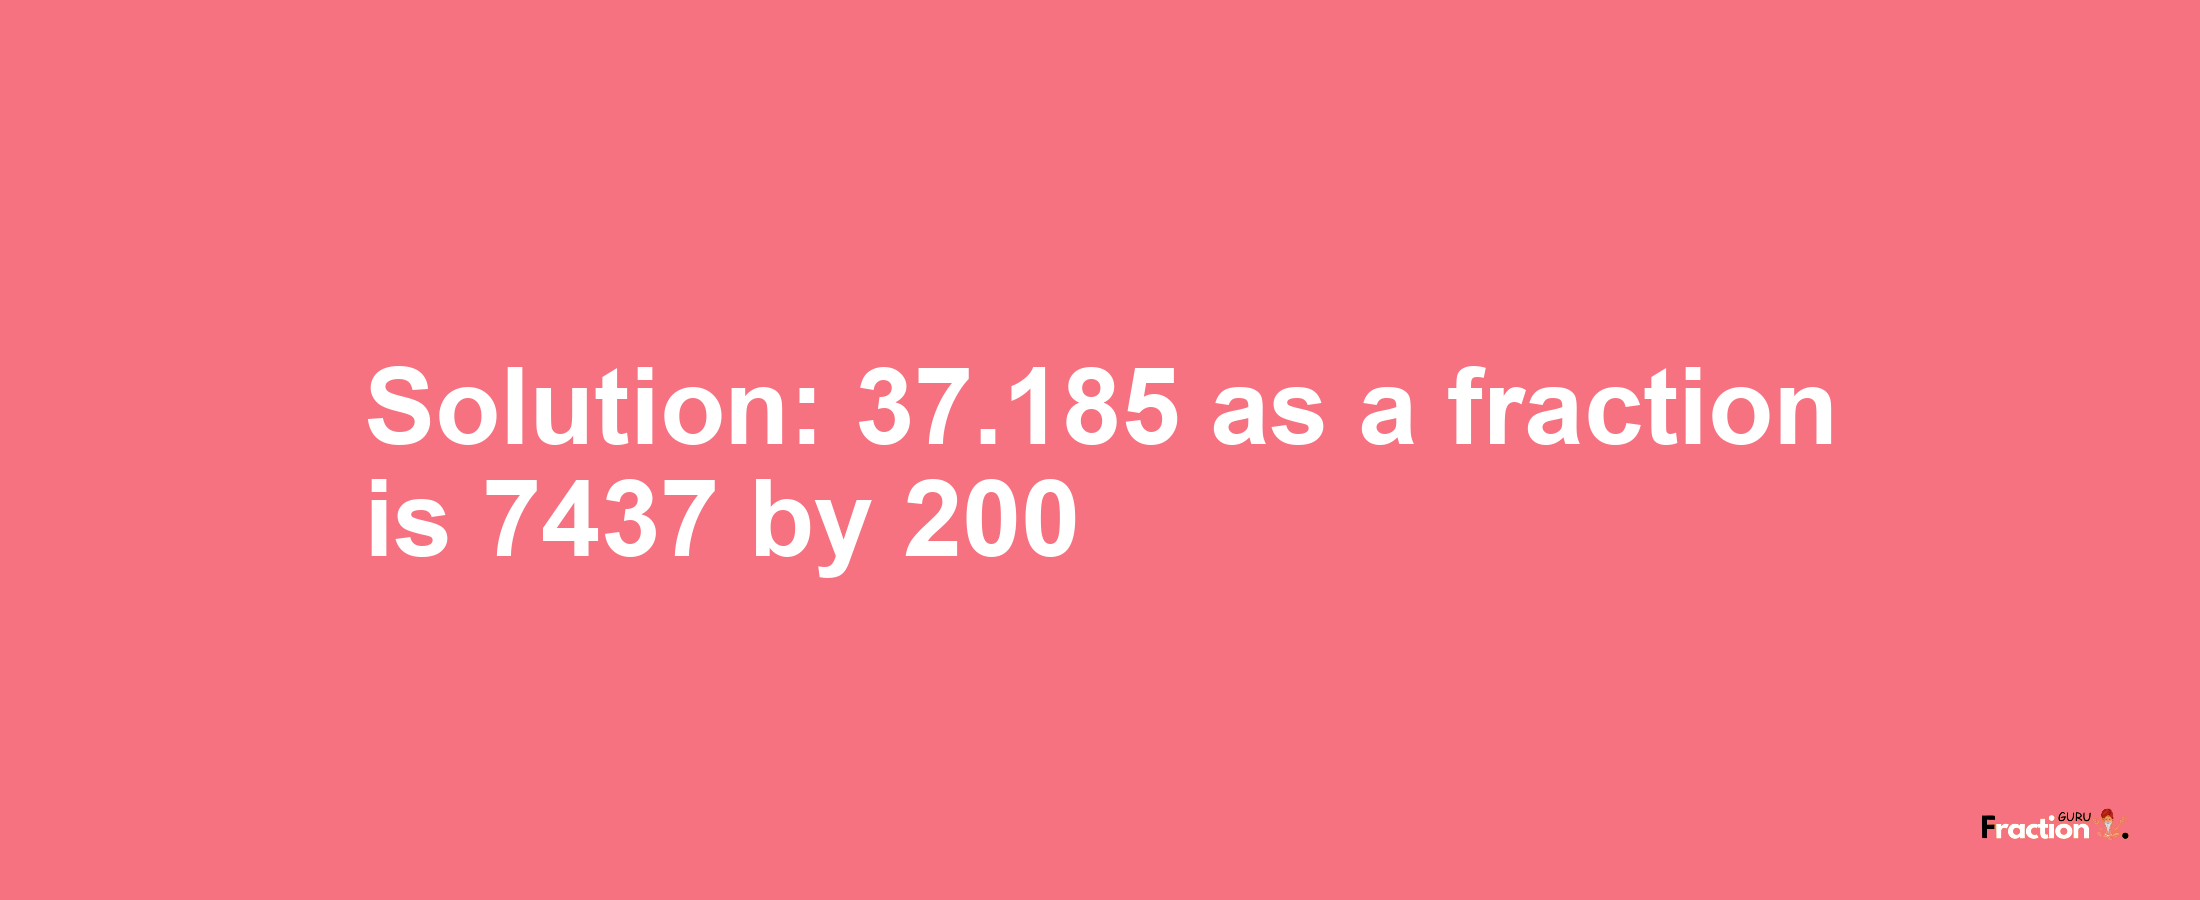 Solution:37.185 as a fraction is 7437/200